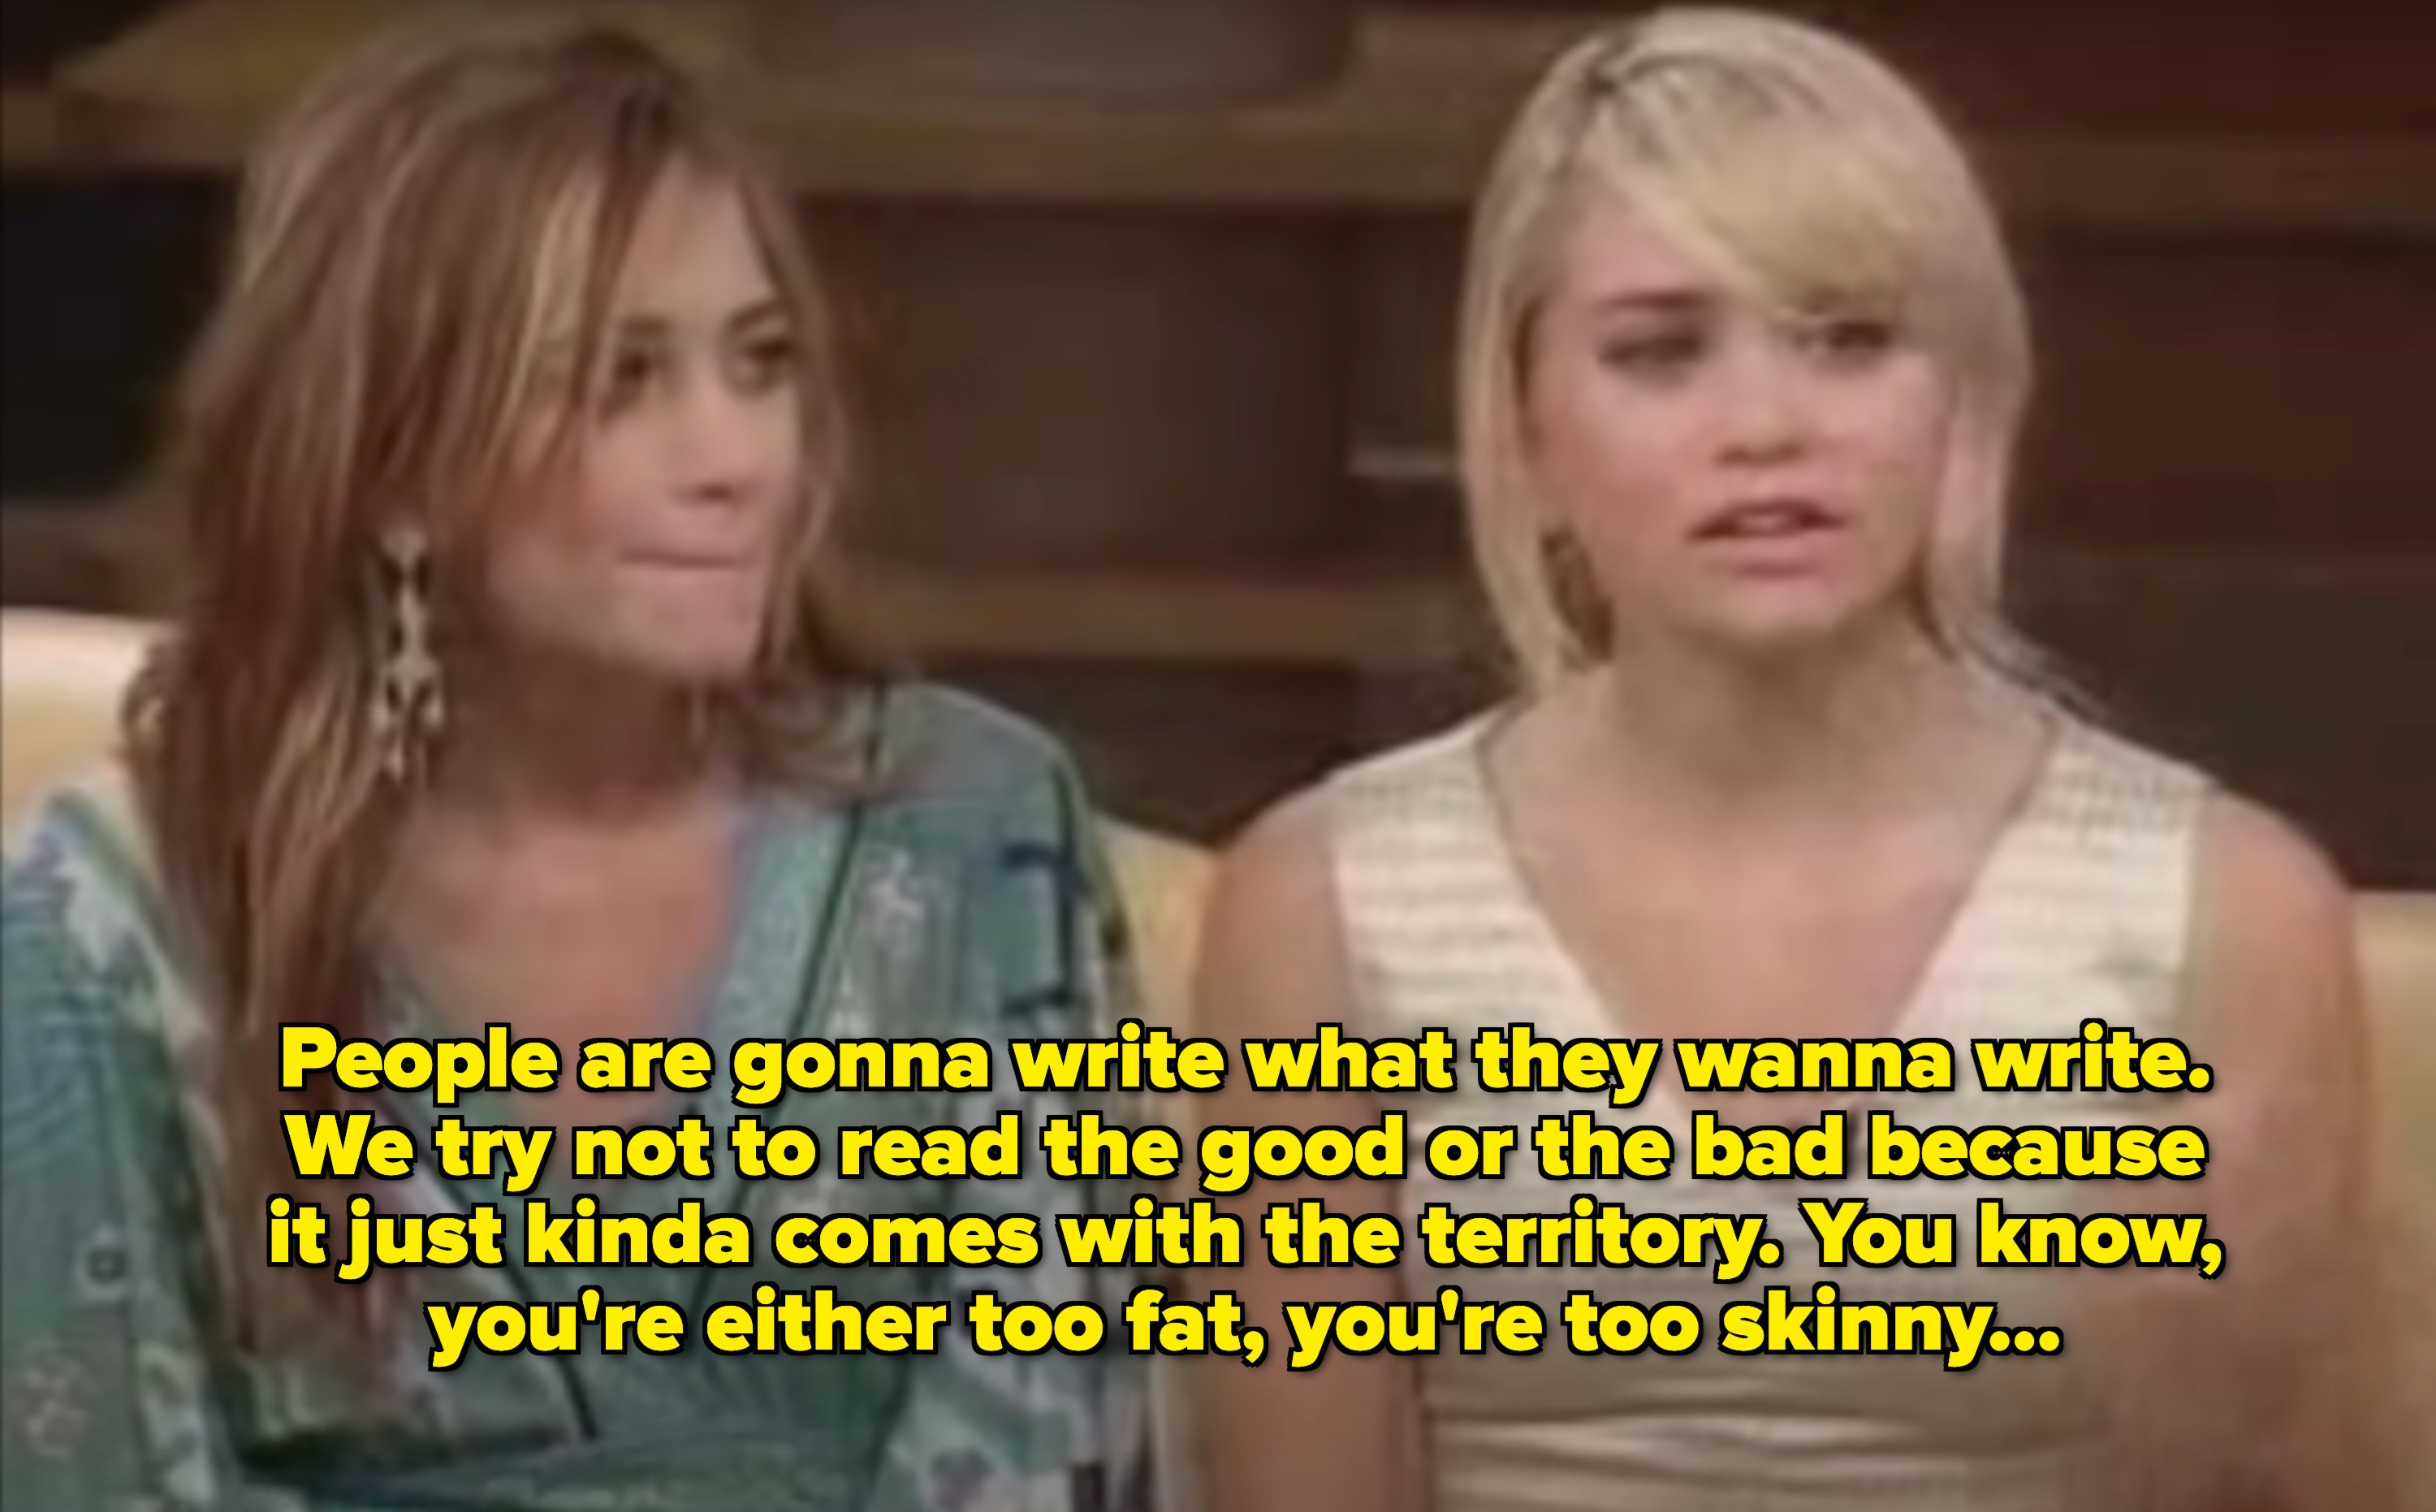 Ashley saying they tend not to read what people write about them, the good or the bad, because there&#x27;s always something; they&#x27;re too skinny to some, too fat to others